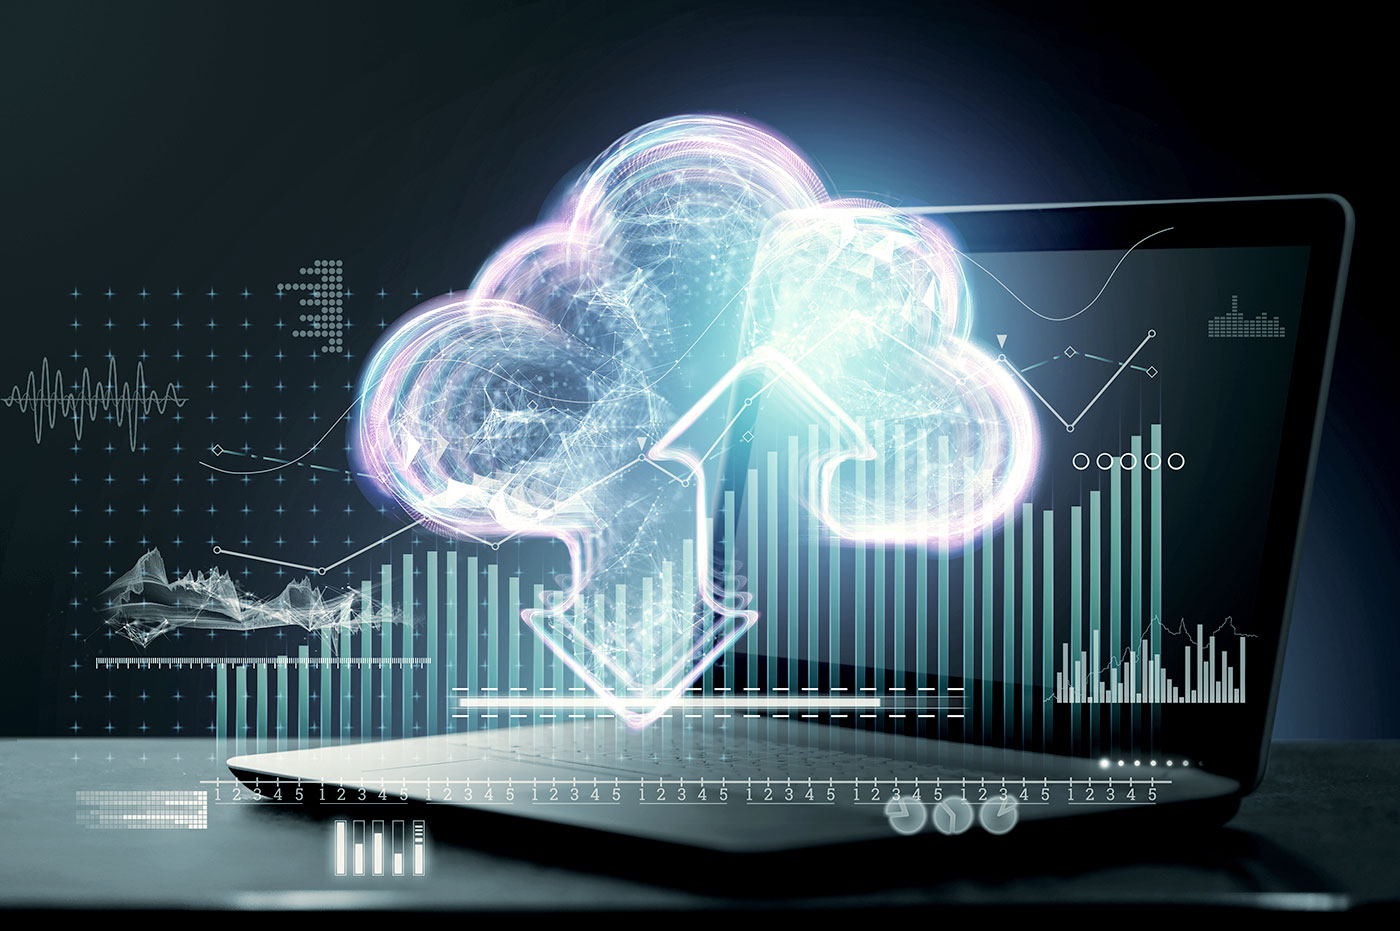 Styelized image of a cloud with technical graphs and symbols hovering over a laptop.